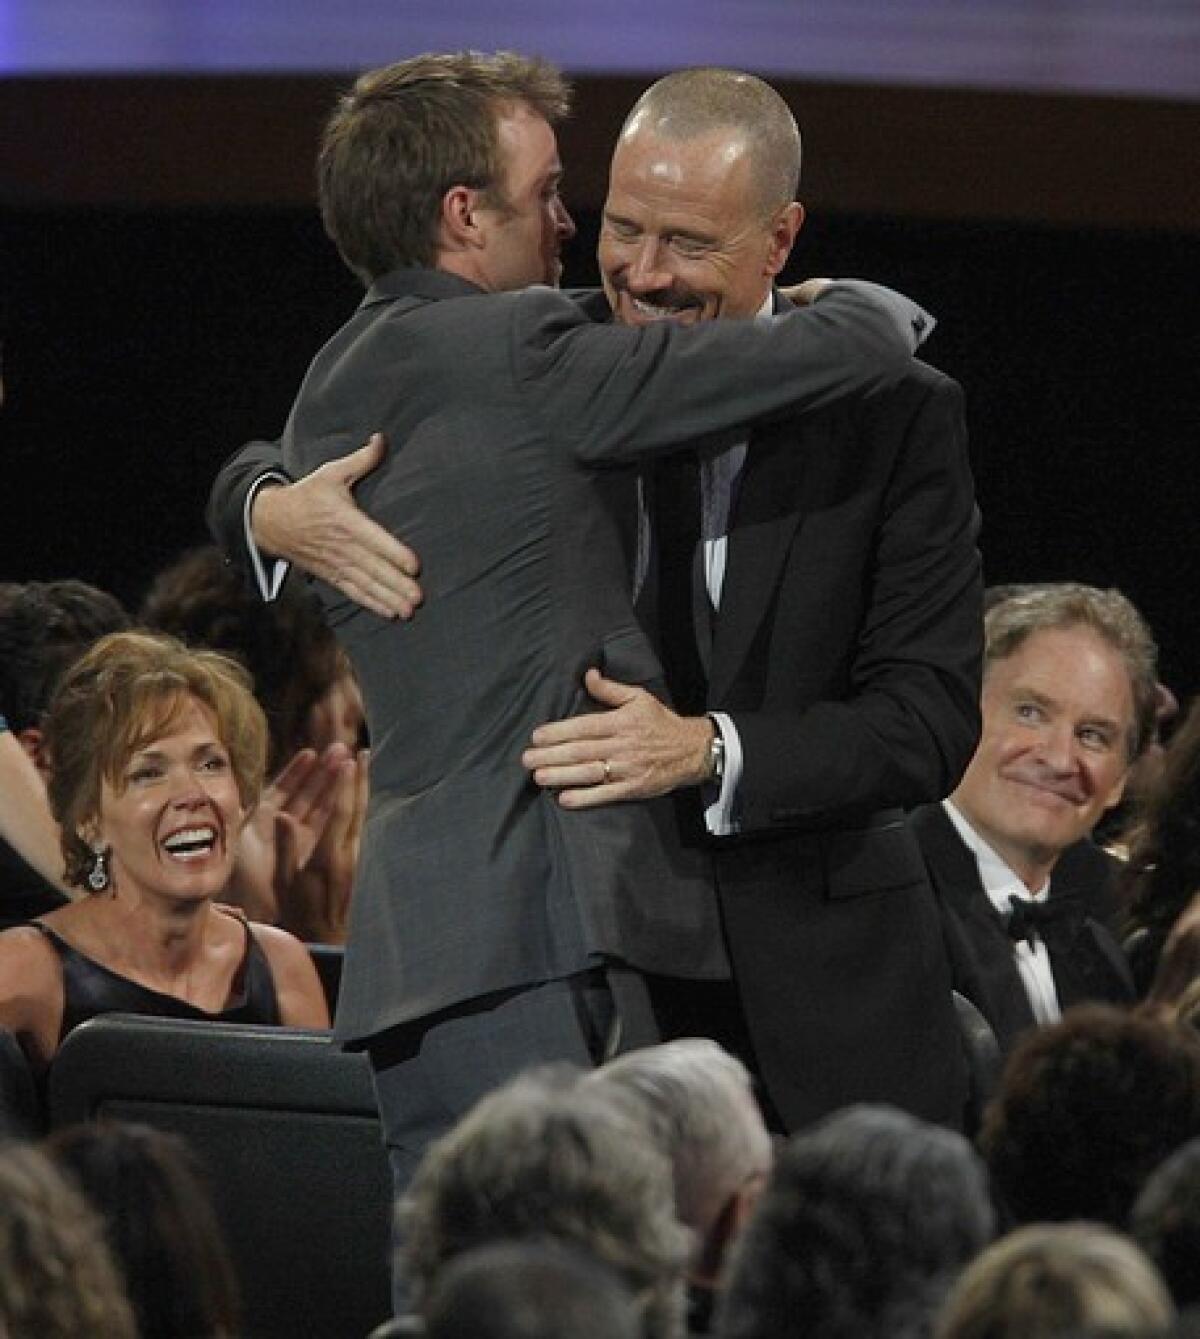 Bryan Cranston gets a hug from "Breaking Bad" costar Aaron Paul. In his speech after winning for outstanding lead actor in a drama series, Cranston gave a nod to his Valley roots.